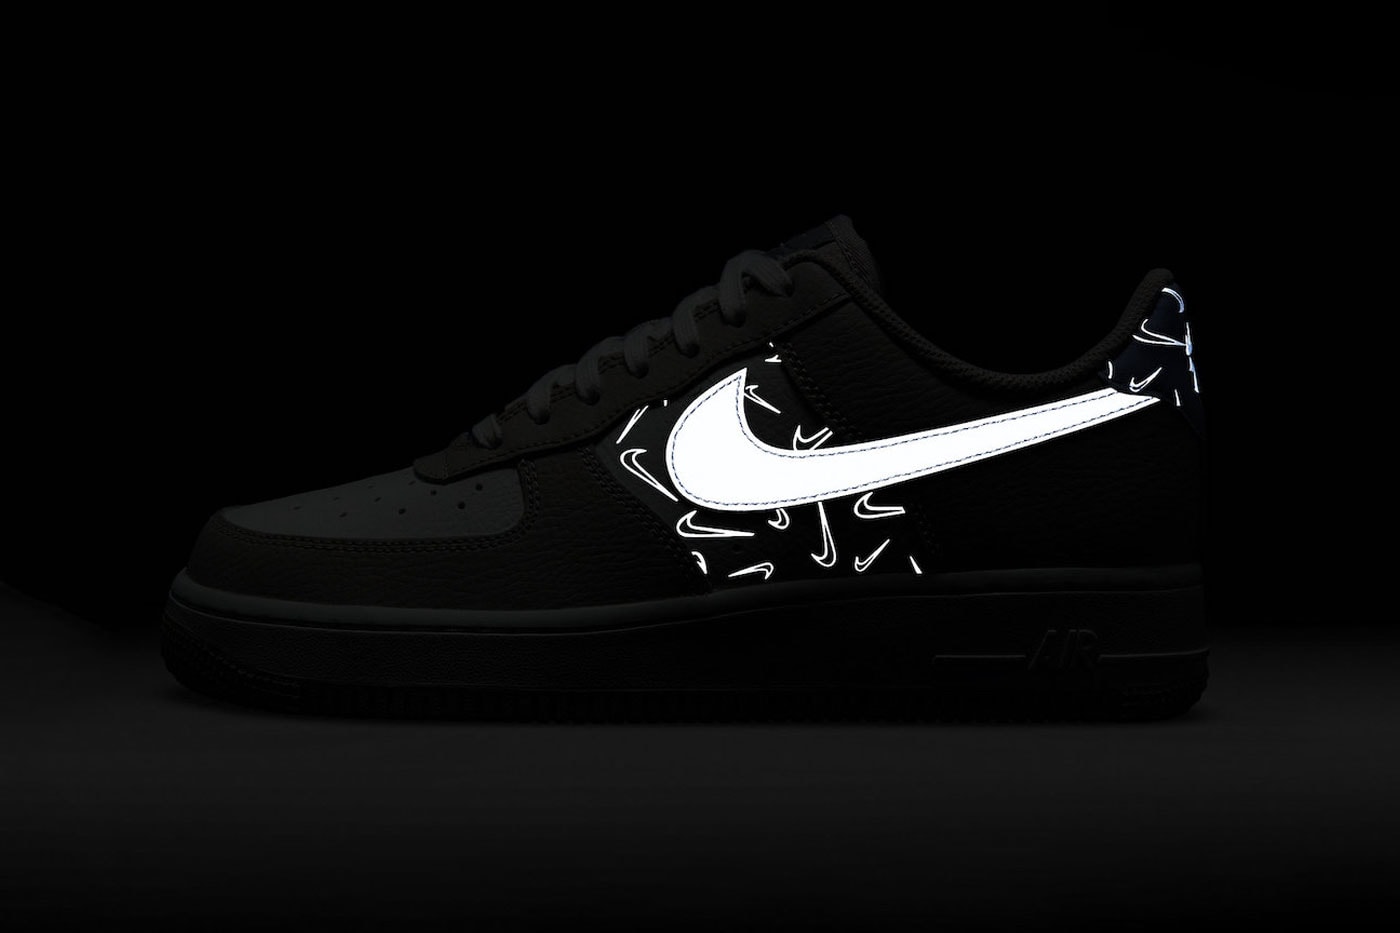 Nike Gets Reflective on this Black and Orange Air Force 1 Low